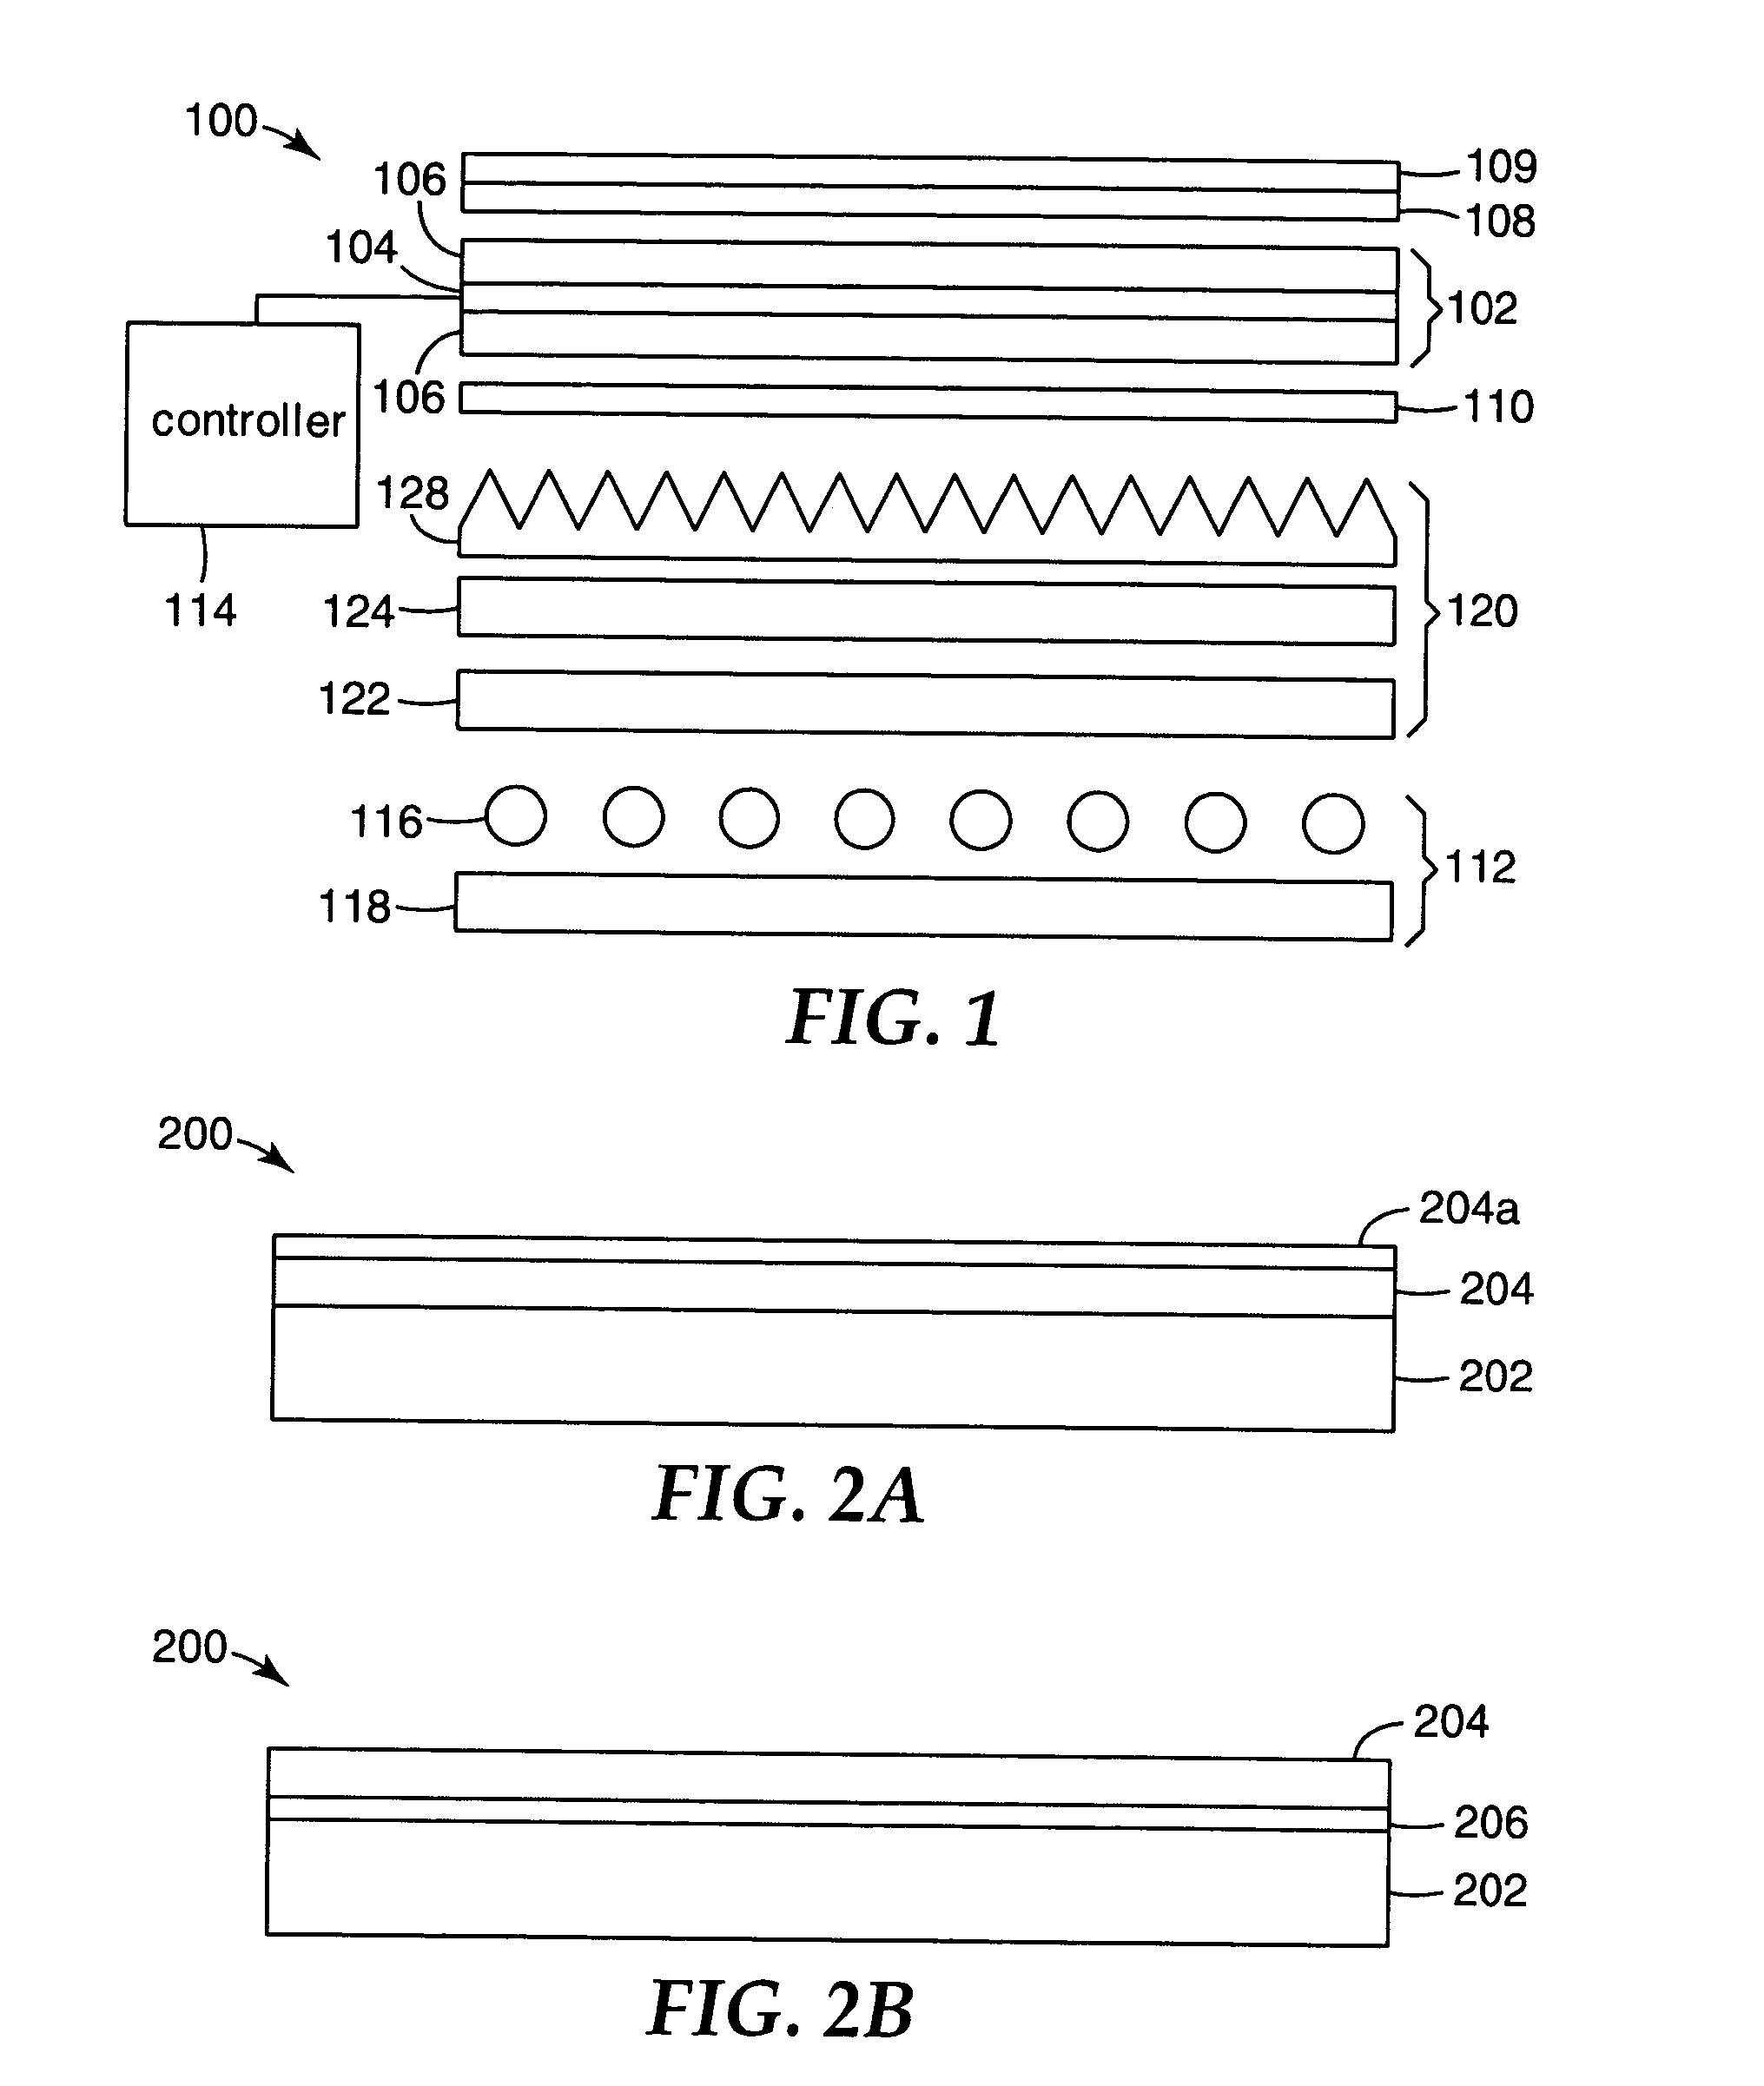 Direct-lit liquid crystal displays with laminated diffuser plates